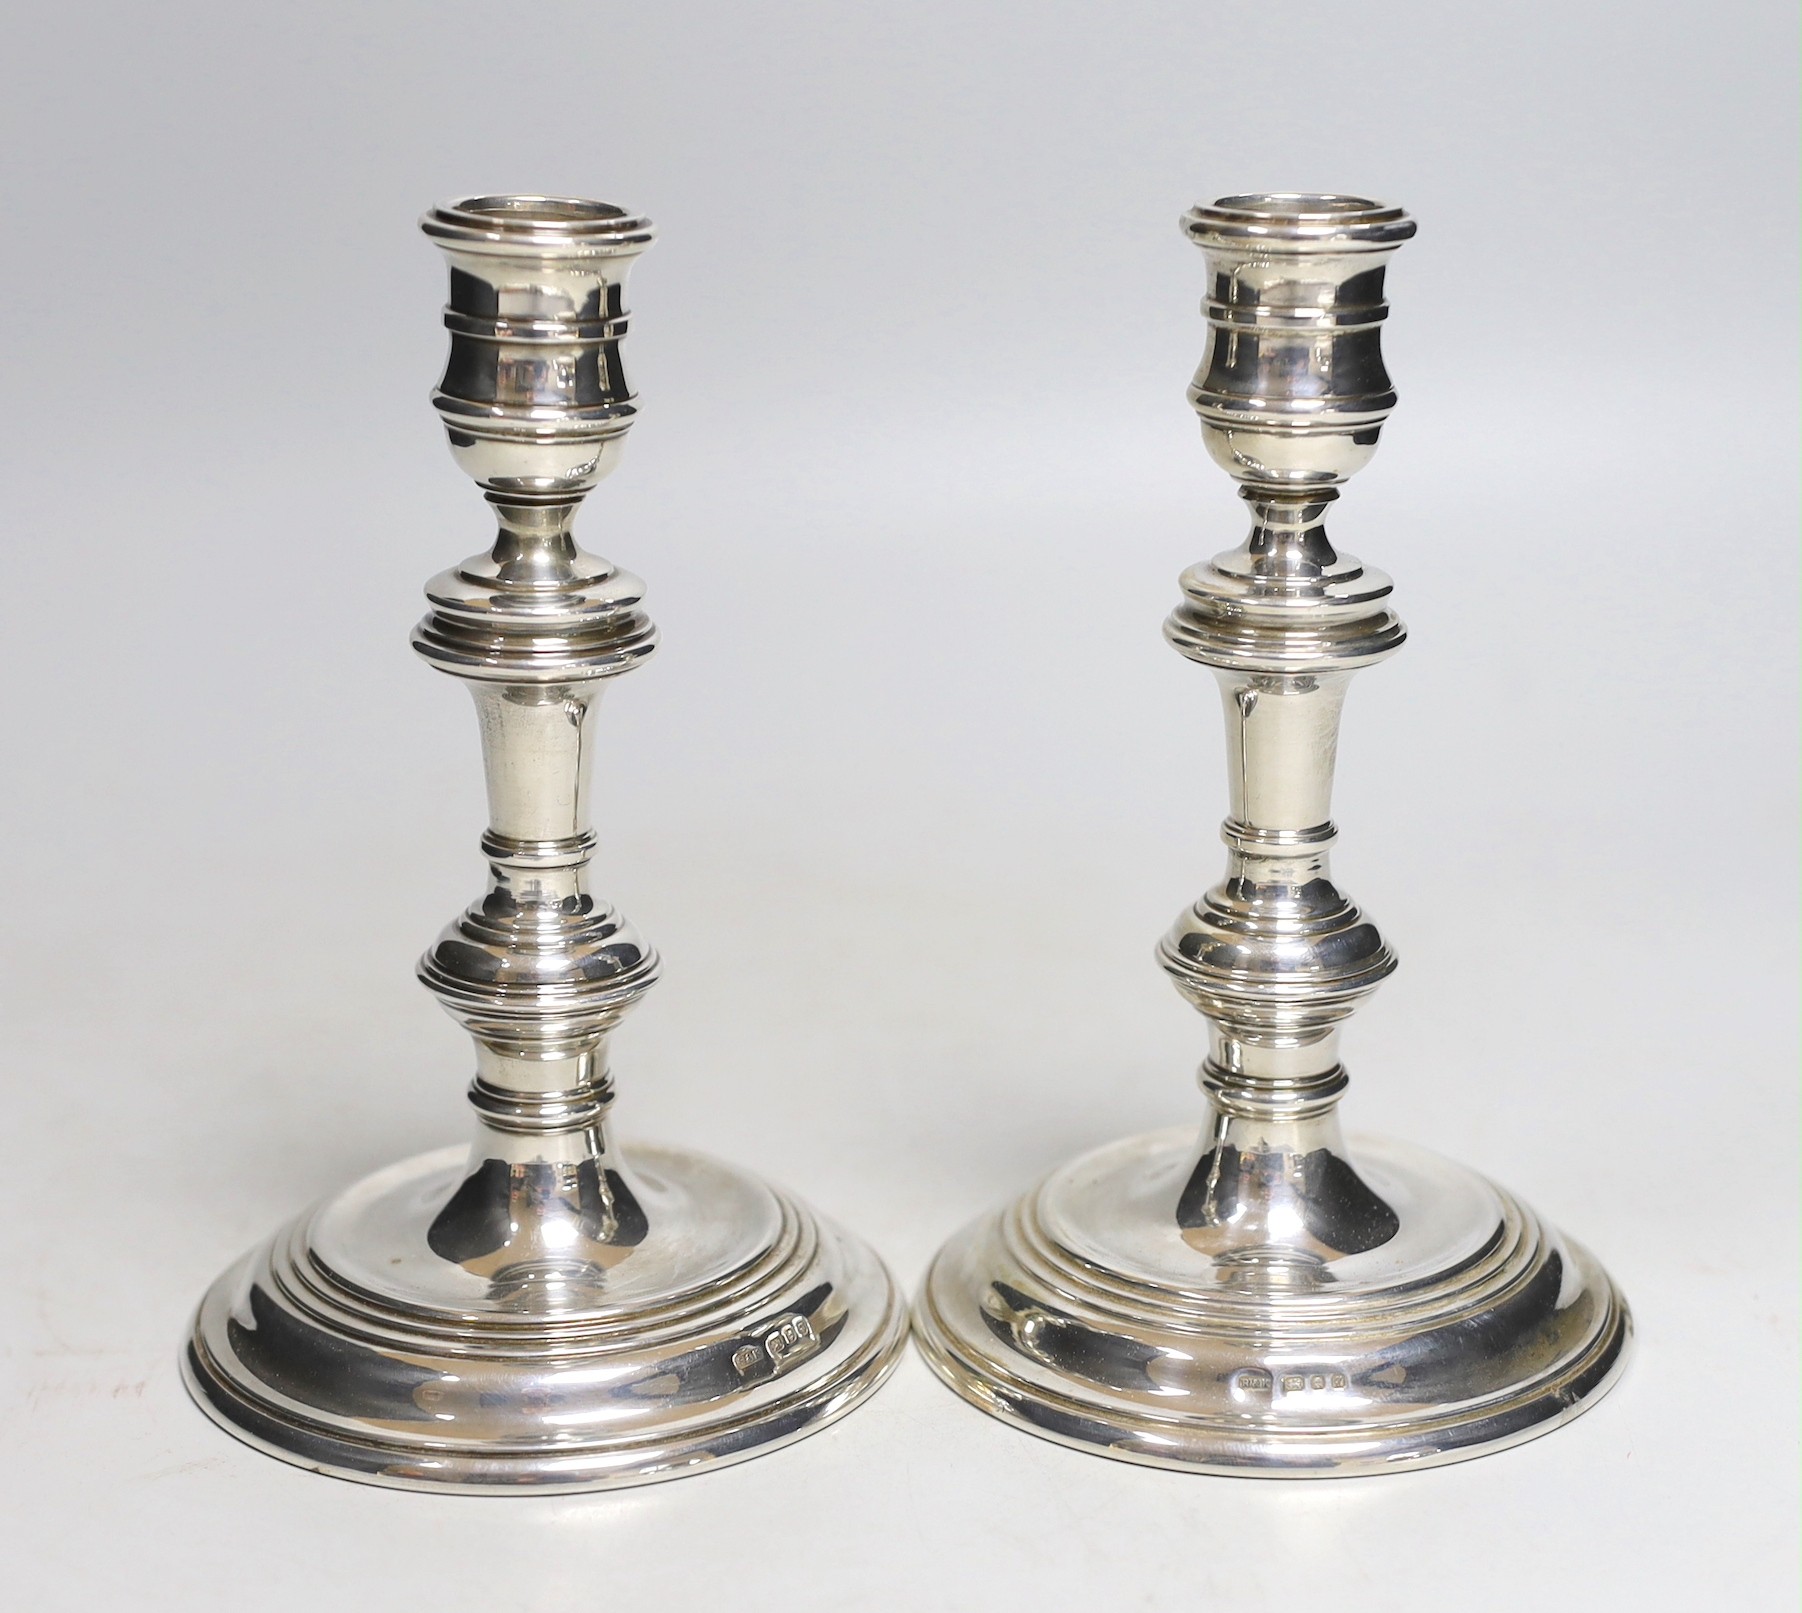 A modern pair of 18th century style candlesticks, Richards & Knight, London, 1971, height 15.7cm, loaded.